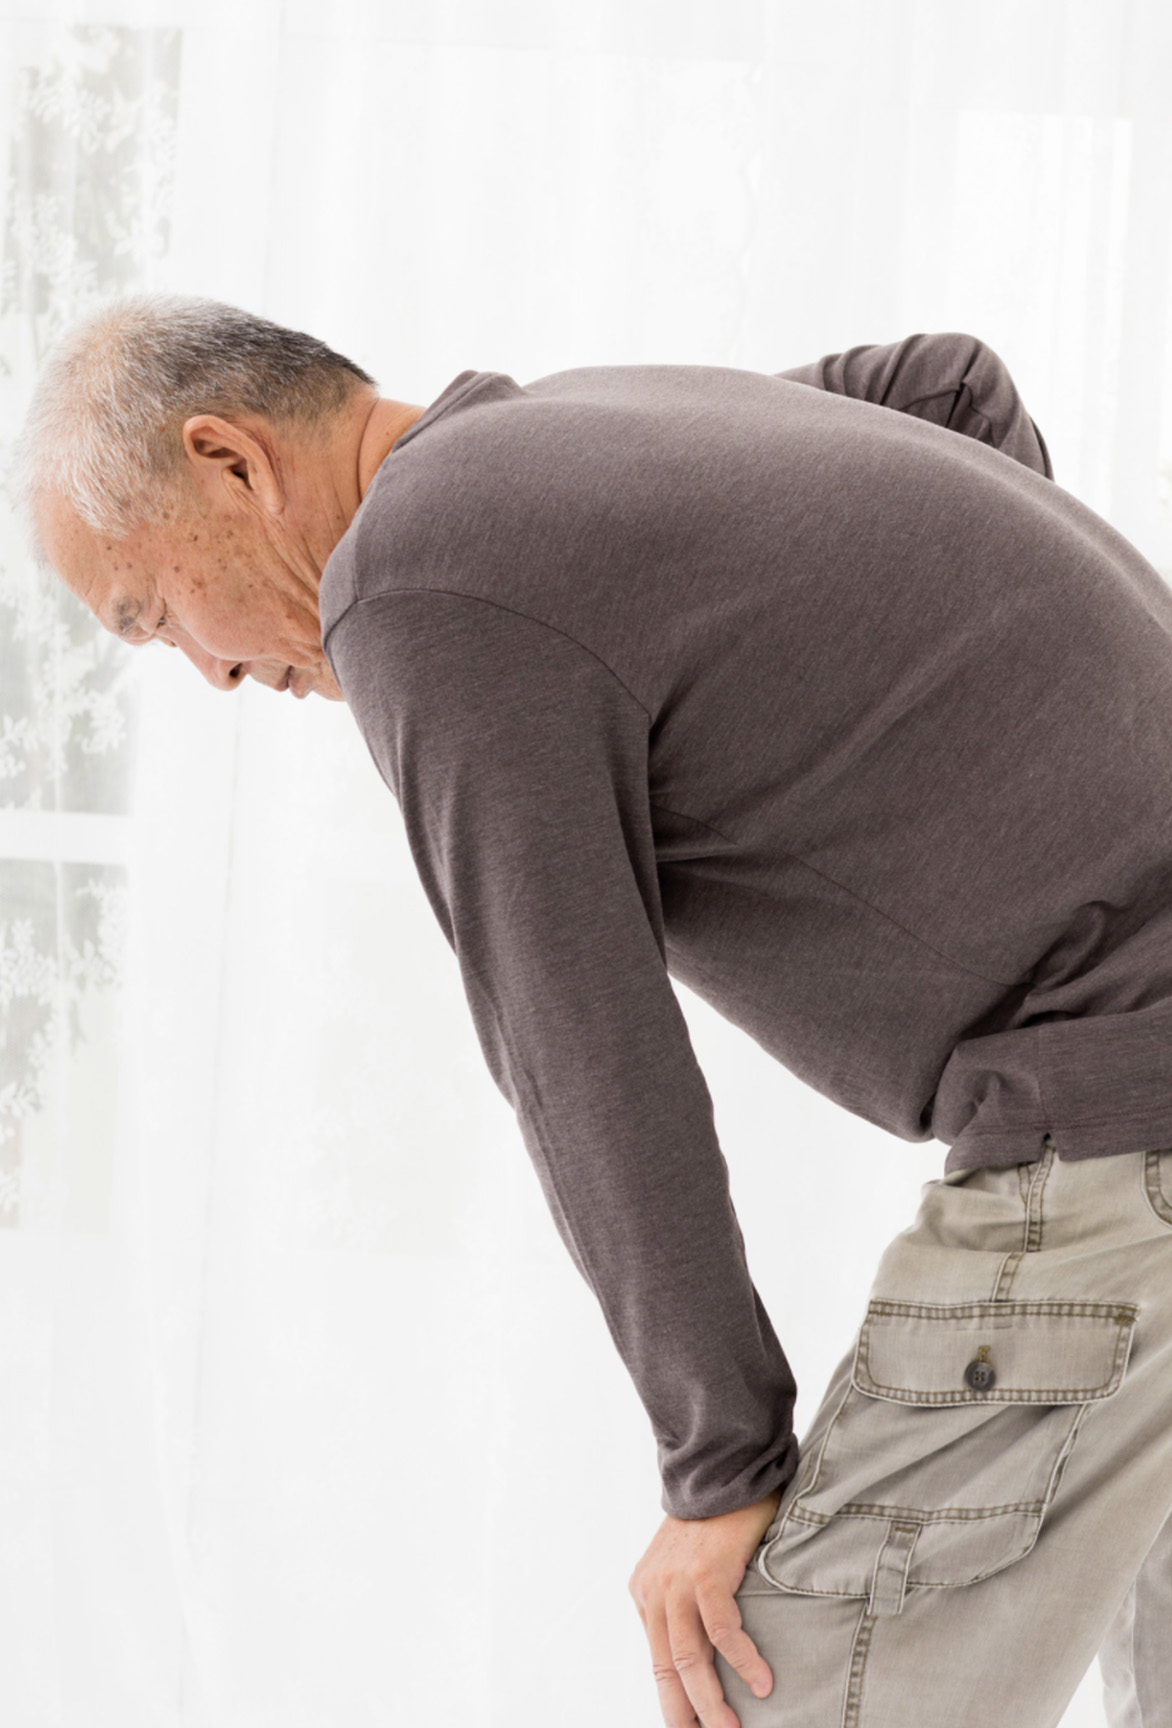 An elderly asian male leans forward and clutches his lower back in pain.